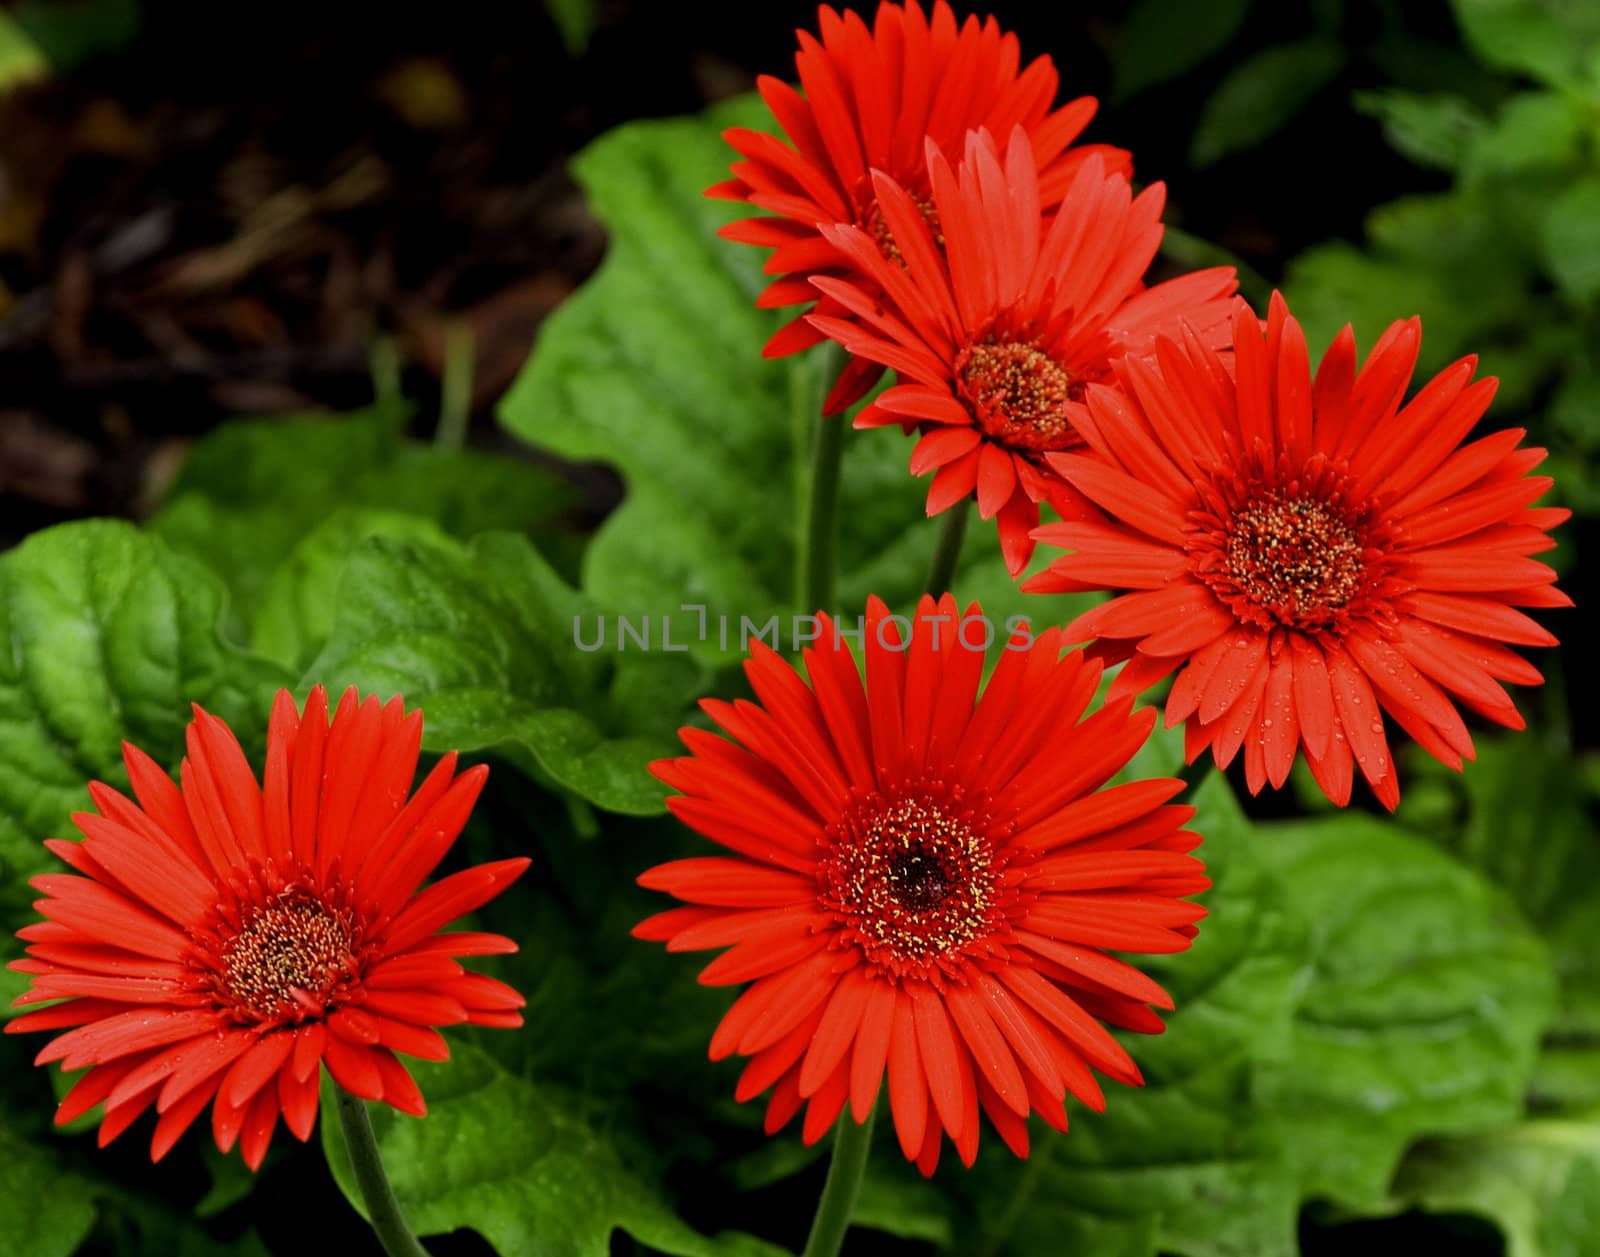 Red Gerbera Daisy by rothphotosc